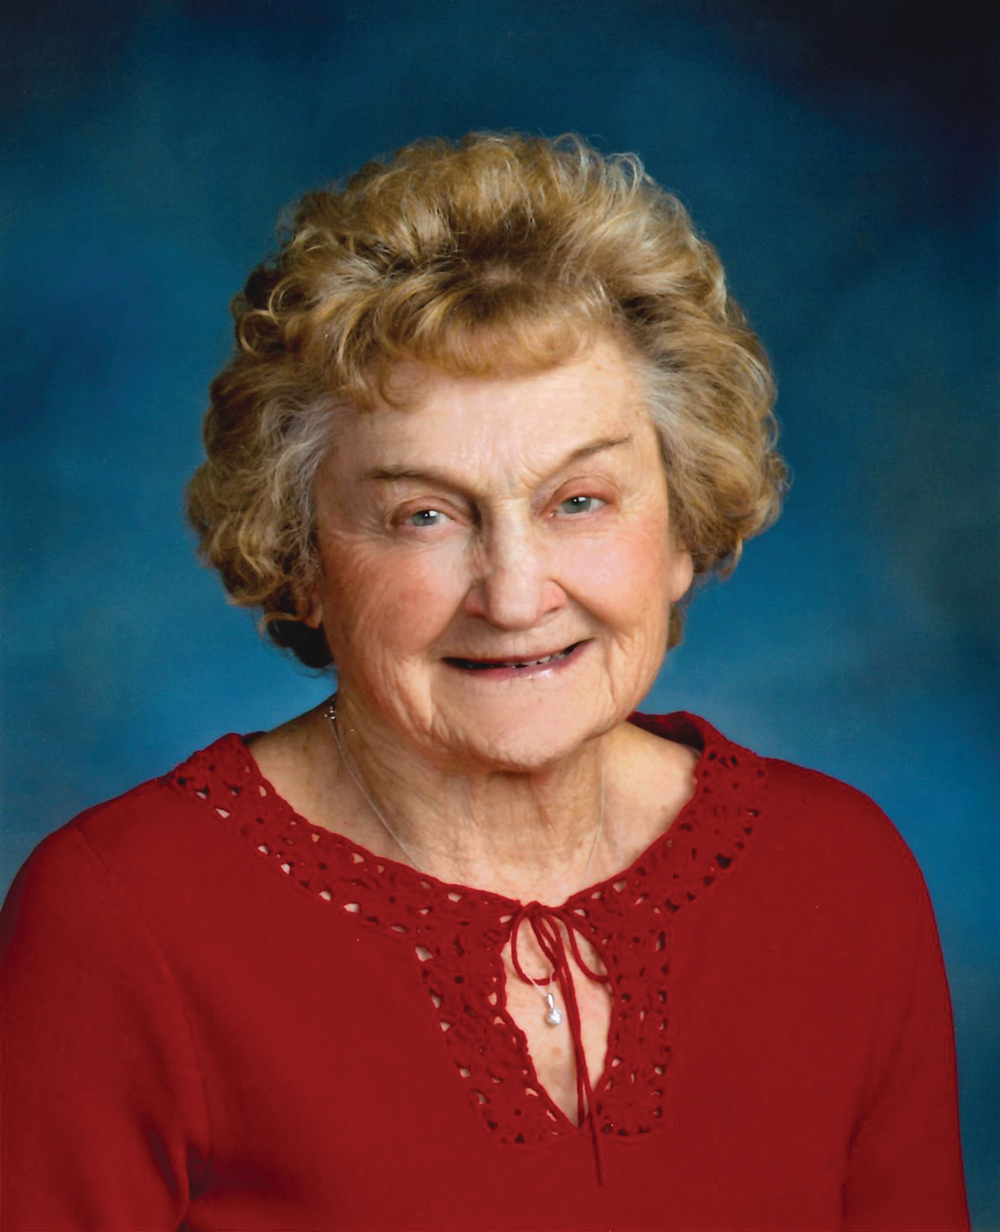 Elderly woman with blond hair and a red shirt smiling